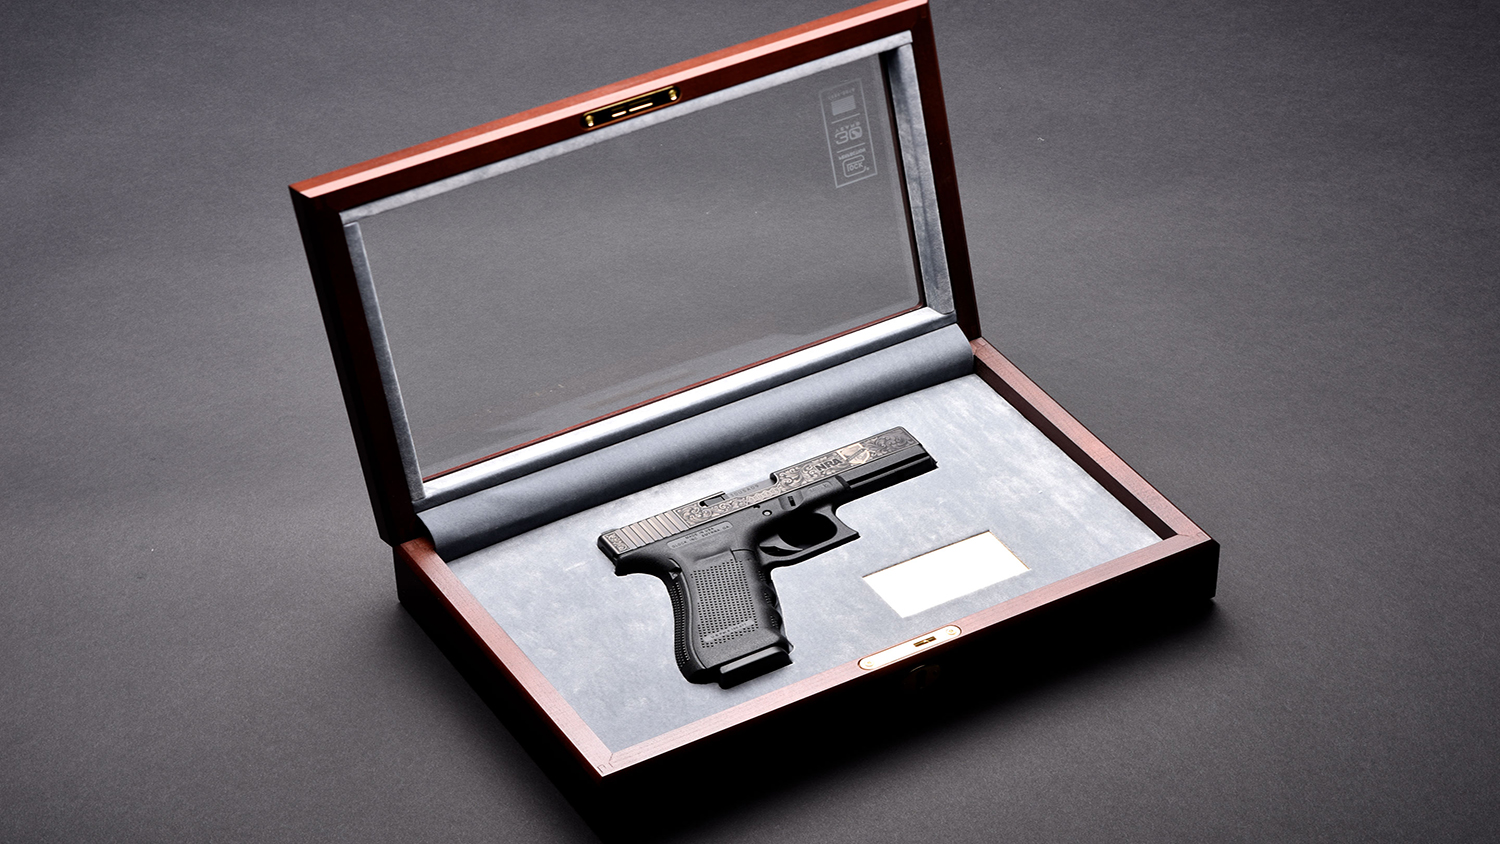 GLOCK Celebrates 30th Anniversary with Donation to NRA